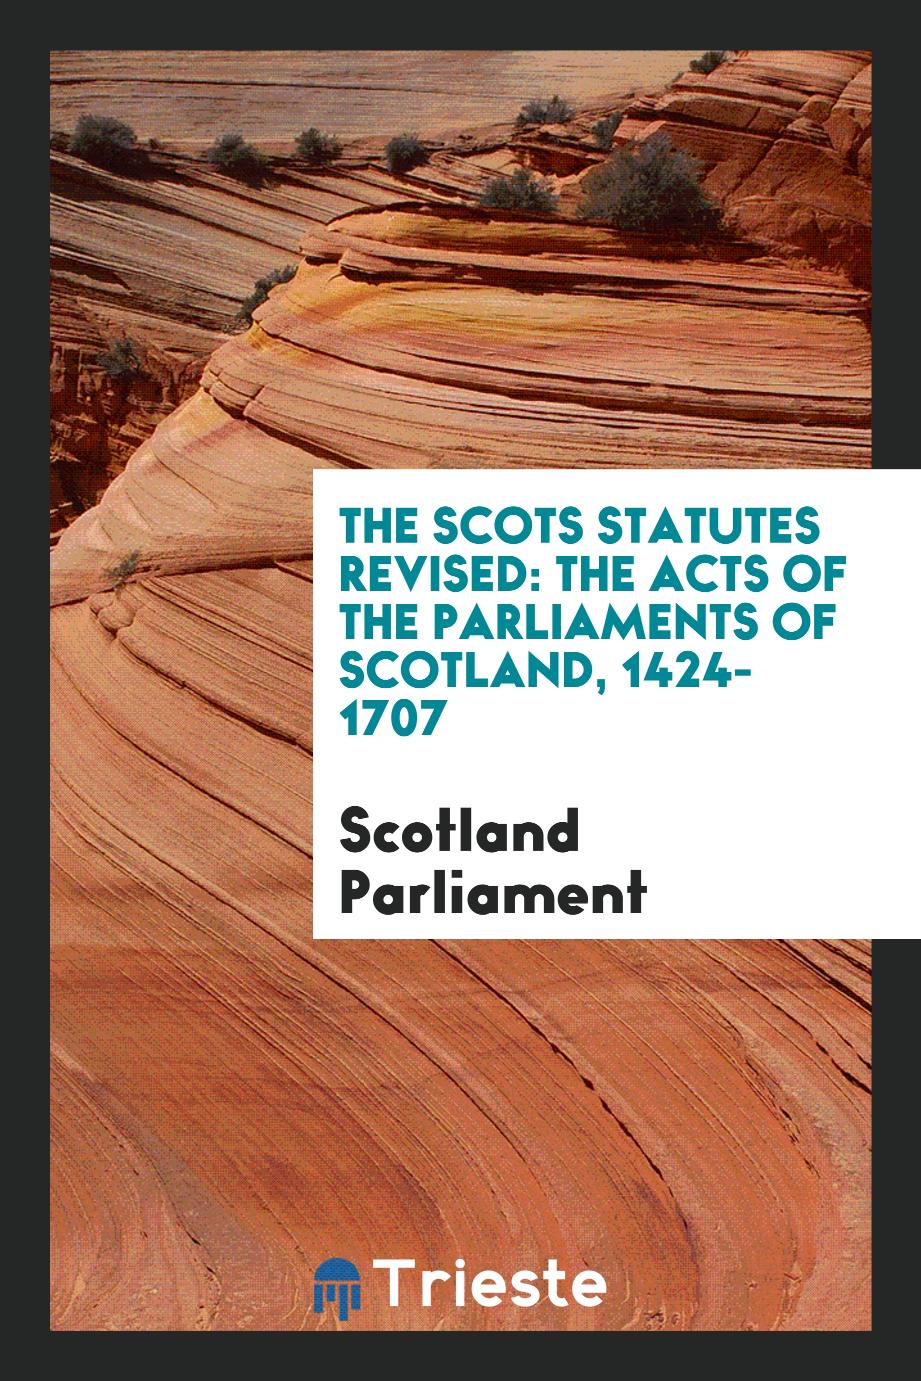 The Scots Statutes Revised: The Acts of the Parliaments of Scotland, 1424-1707